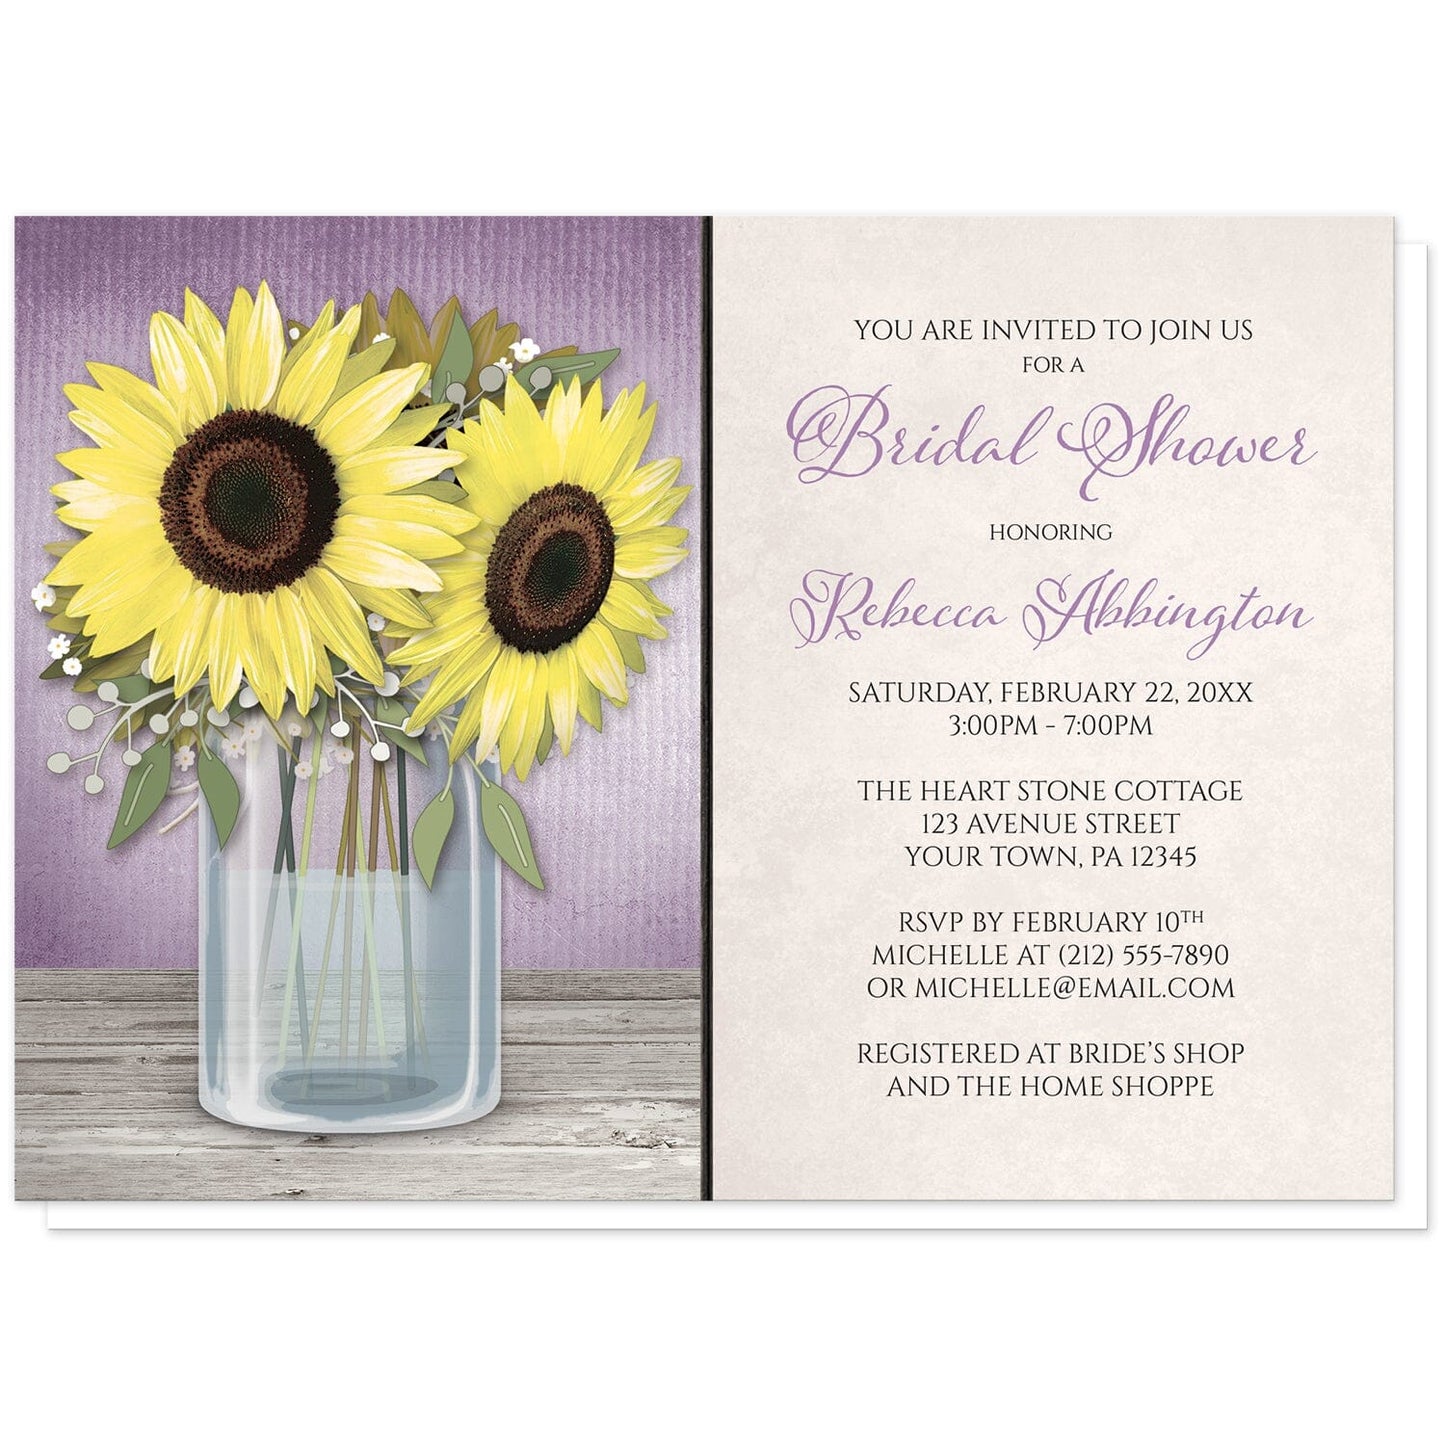 Sunflower Purple Mason Jar Rustic Bridal Shower Invitations at Artistically Invited. Country-inspired sunflower purple mason jar rustic bridal shower invitations designed with an illustration of a mason jar with water, holding big yellow sunflowers on a light wood tabletop over a rustic purple background. Your personalized bridal shower celebration details are custom printed in purple and dark brown over a light parchment-like background to the right of the sunflower mason jar design.